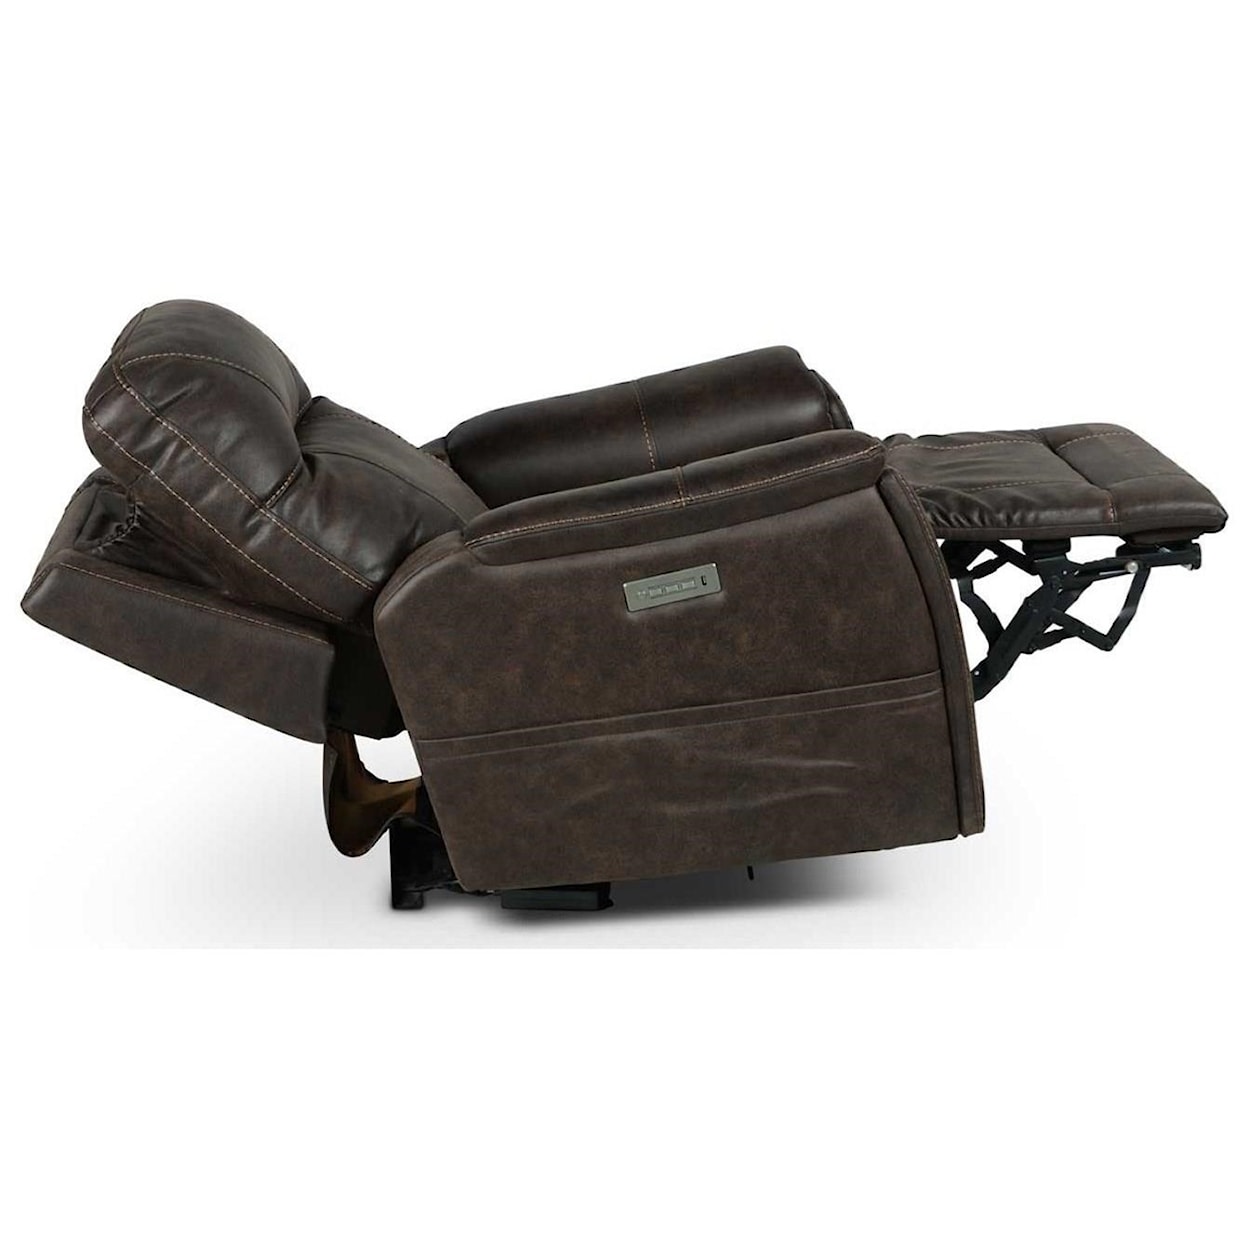 Steve Silver Luther LUTHER TRIPLE POWER RECLINER |